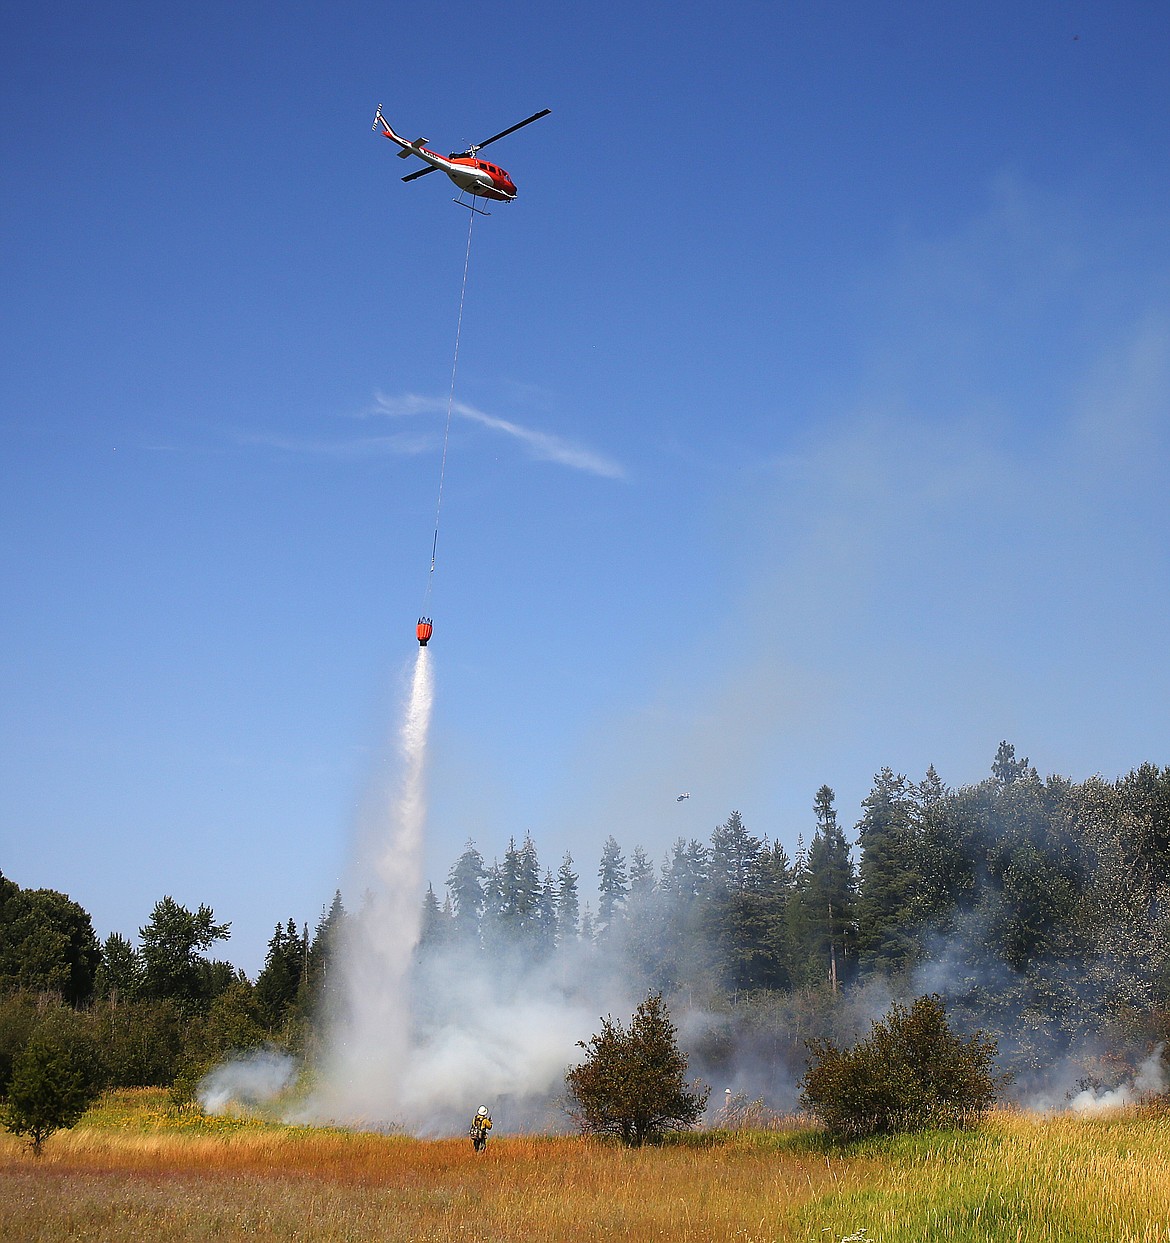 LOREN BENOIT/Press
A helicopter dumps water on a fire at Dodd and Strahorn roads in Hayden. There were at least six different wildfires burning in various locations throughout the north and western sections of Kootenai County on Monday.